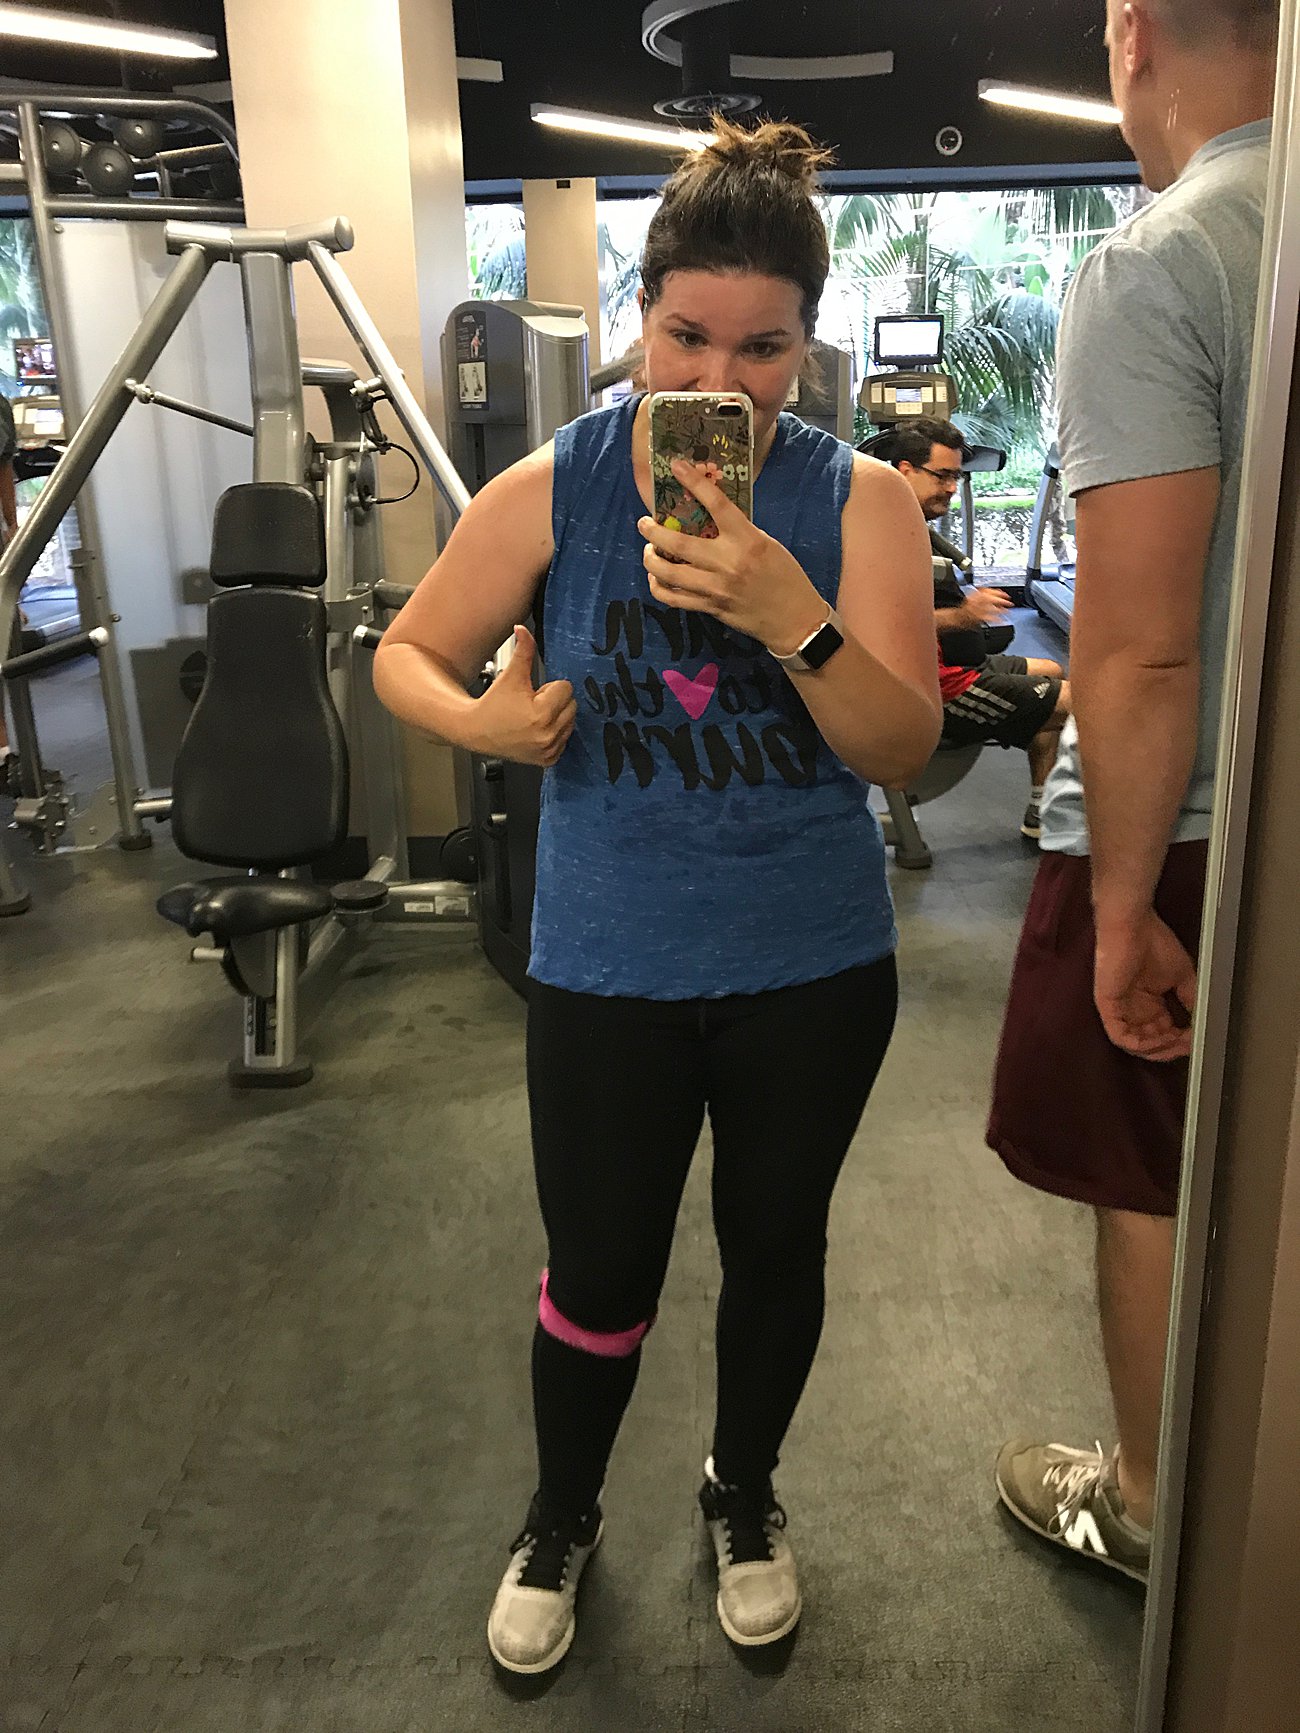 Burn Bootcamp Review - Fitness Update (10) - My Fitness Journey - When the Going Gets Tough by popular North Carolina blogger Still Being Molly